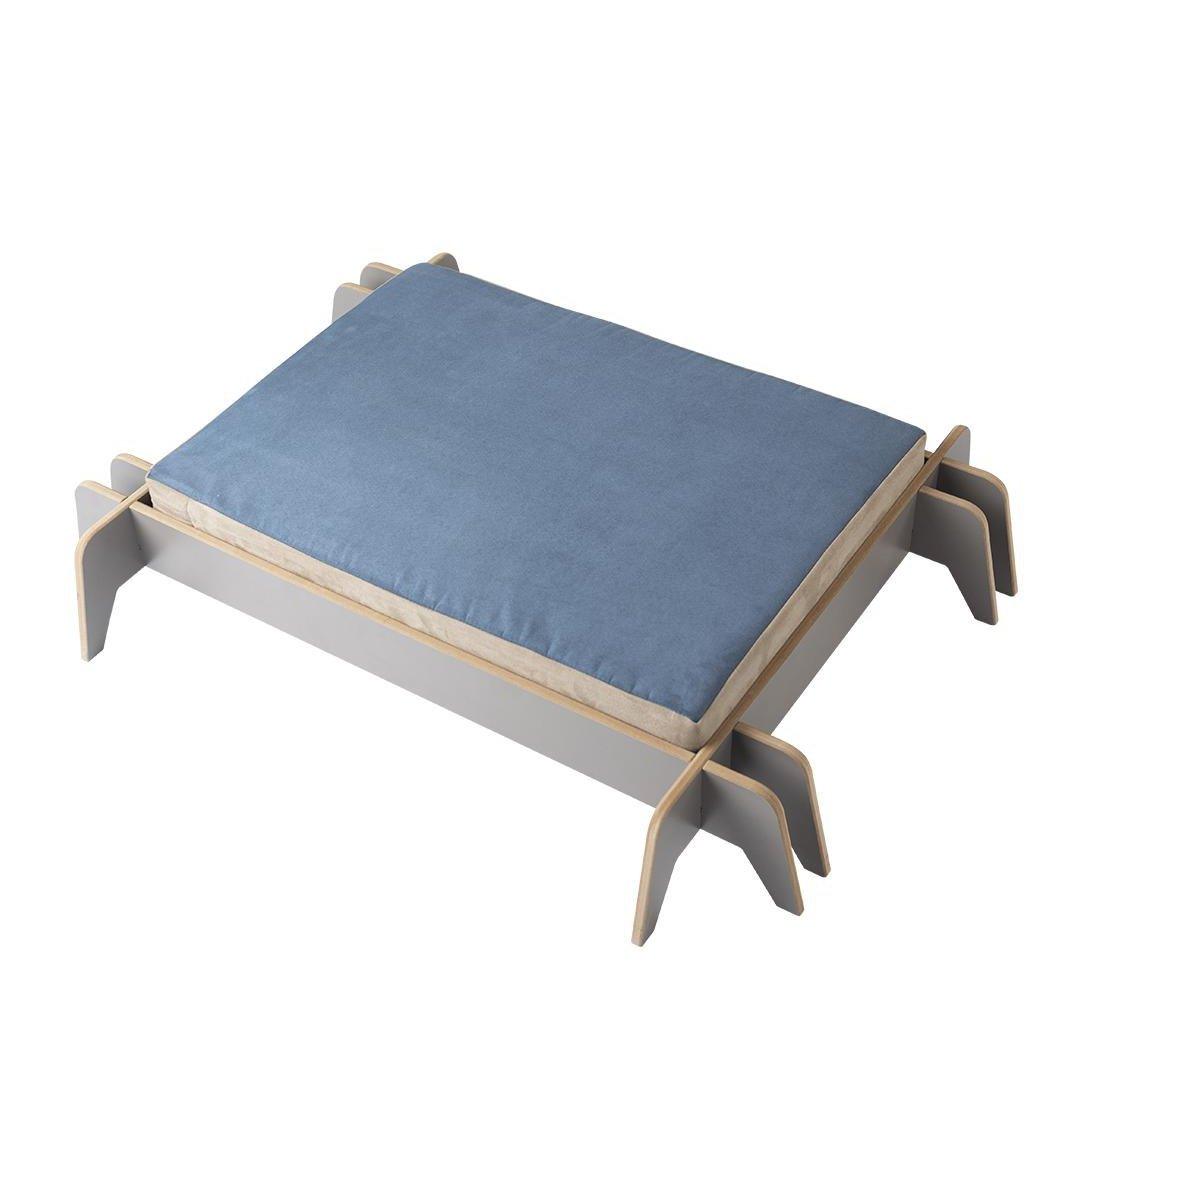 Cat Bed Paros - Cat Beds - Luxury Dog House - ewoodcollection.com